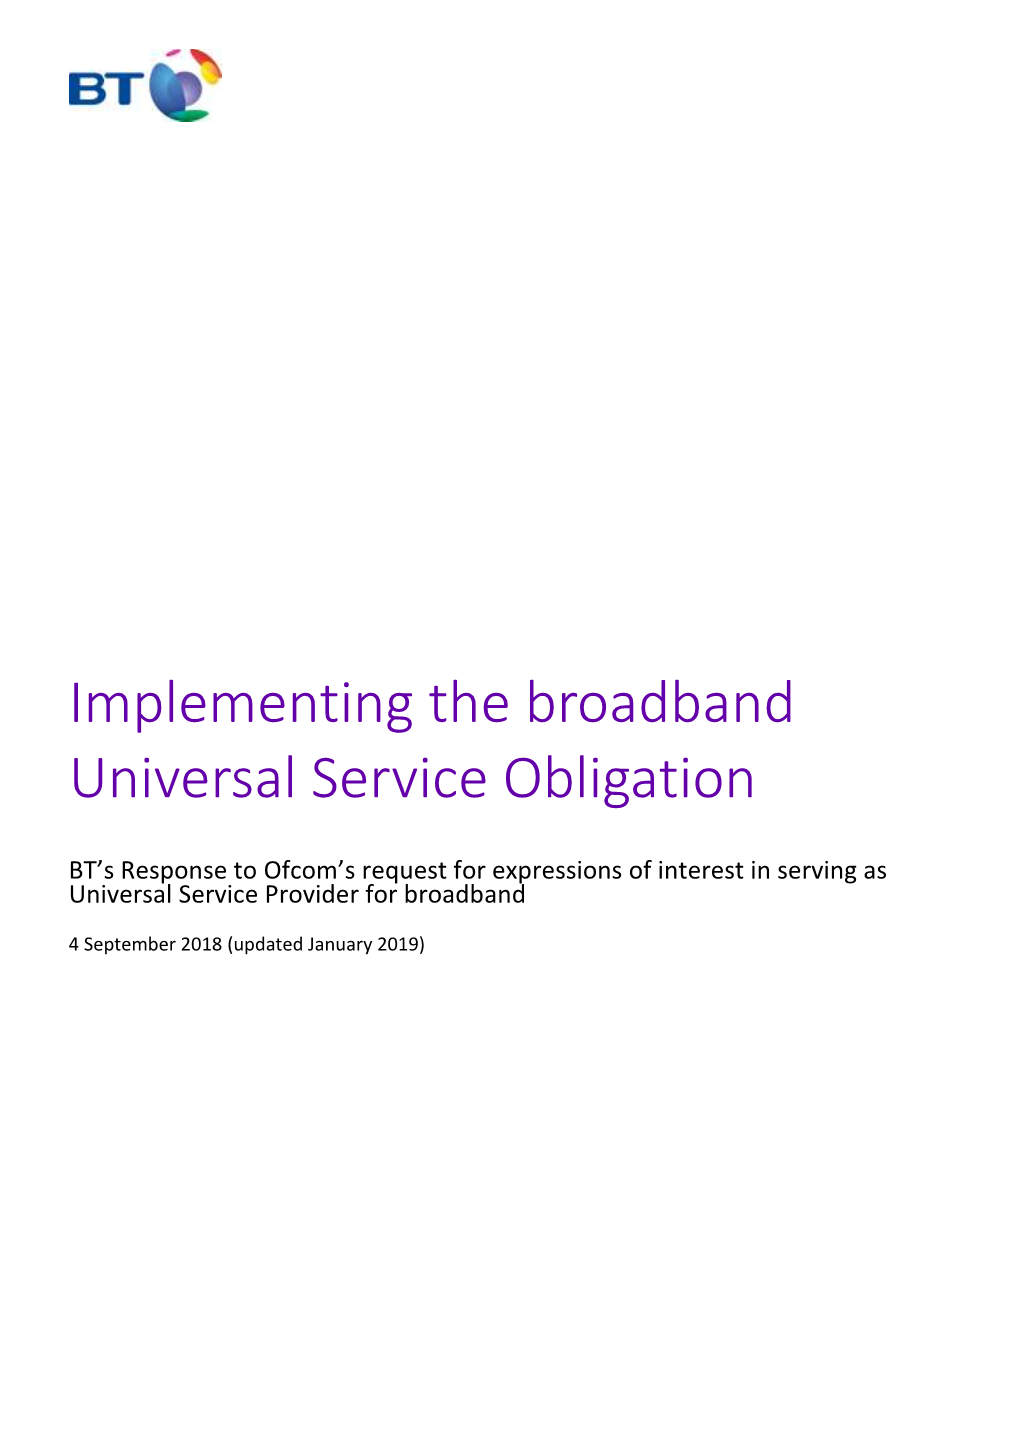 BT's Response to Implementing the Broadband Universal Service